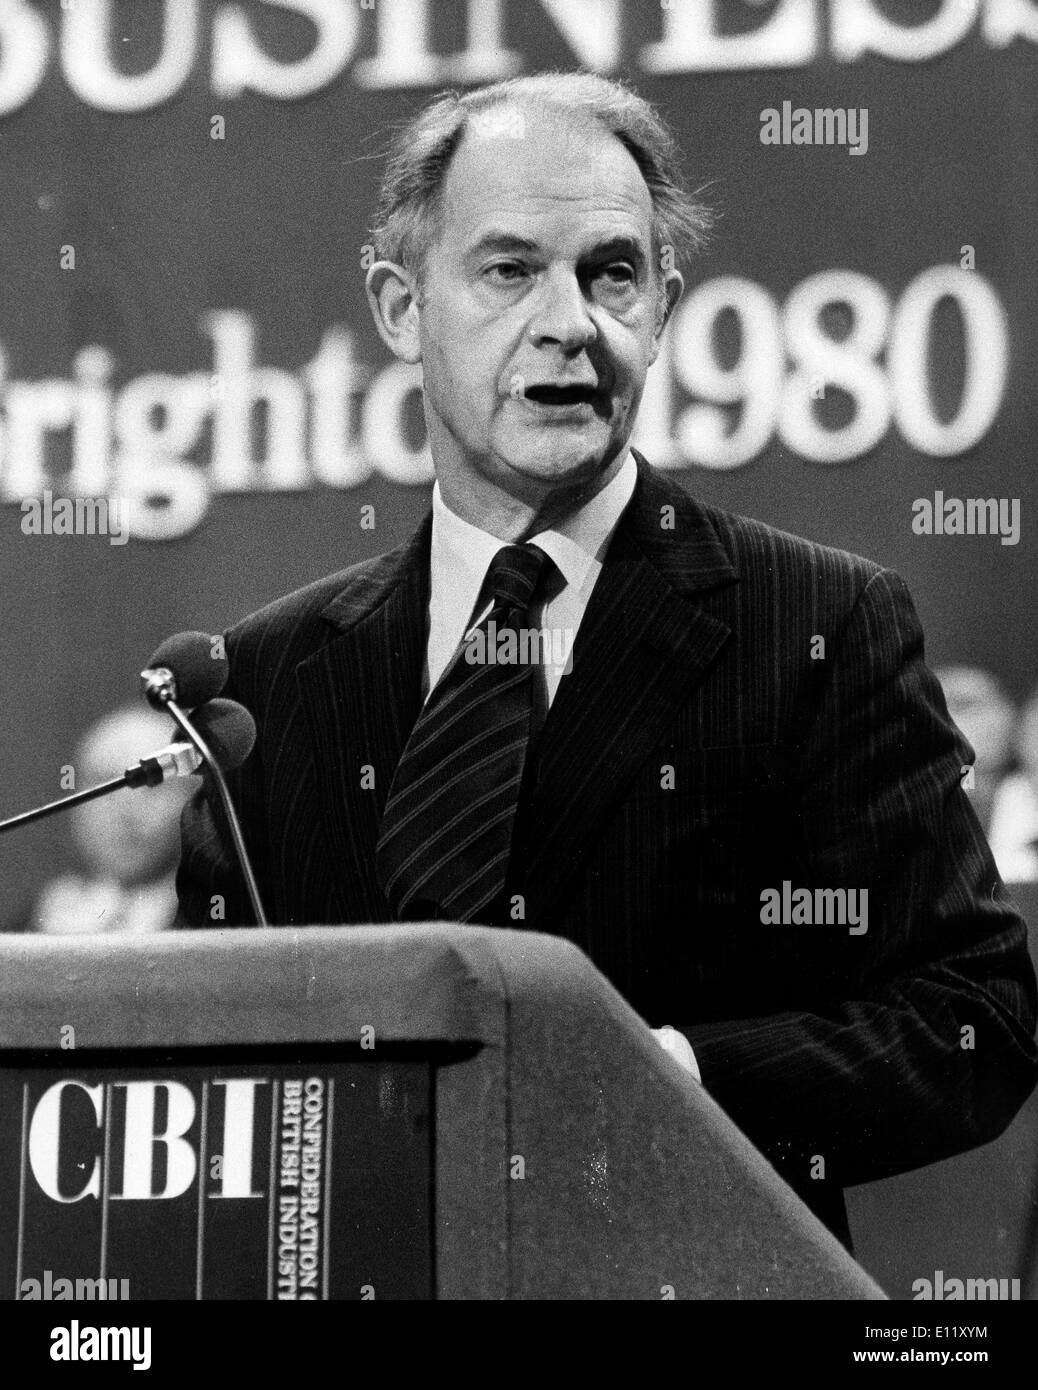 Nov 12, 1980; London, UK; Sir TERENCE BECKETT Director General of the British Industry at the CBI Conference Stock Photo